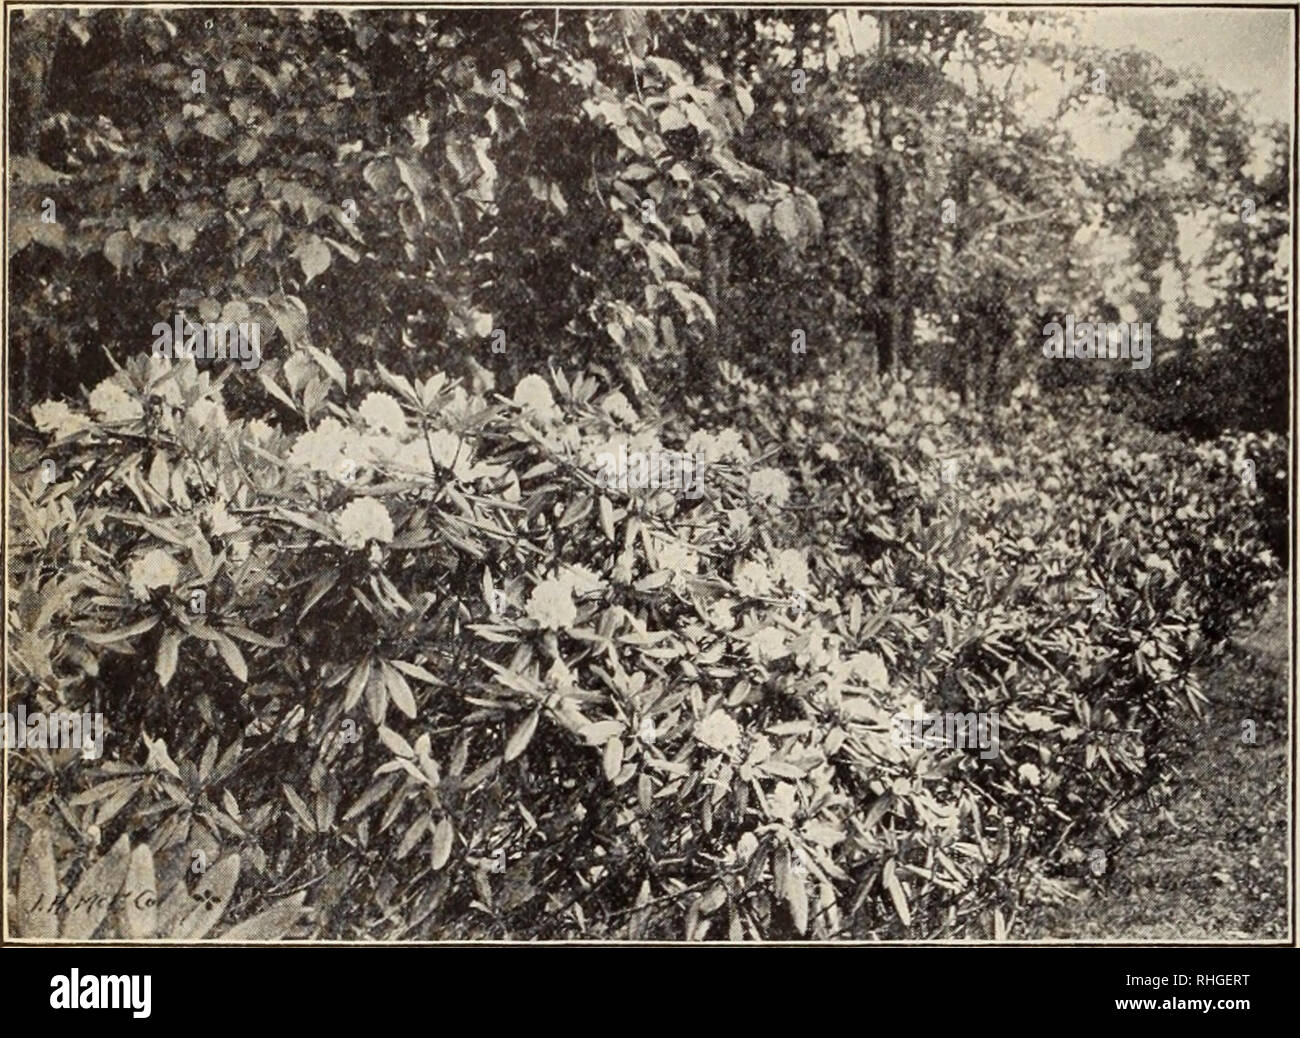 . Boddington's quality bulbs, seeds and plants / Arthur T. Boddington.. Nursery Catalogue. 72 Arthur T.Boddington, 34^2 West 14th St.. New Vork City Native Hardy RHODODENDRON MAXIMUM The native Rhododendron is indigene us to the northern United States. Plants of this beautiful Rhododendron are most useful for c)uickly and permanently producing fine landscape effects at a very low price. We otter carefully selected, well-rooted plants, collected in Sullivan county. New York, at $150 per car, delivered f. o. b. at any freight station within. Rhododendron maximum [50 miles of New York City. The n Stock Photo